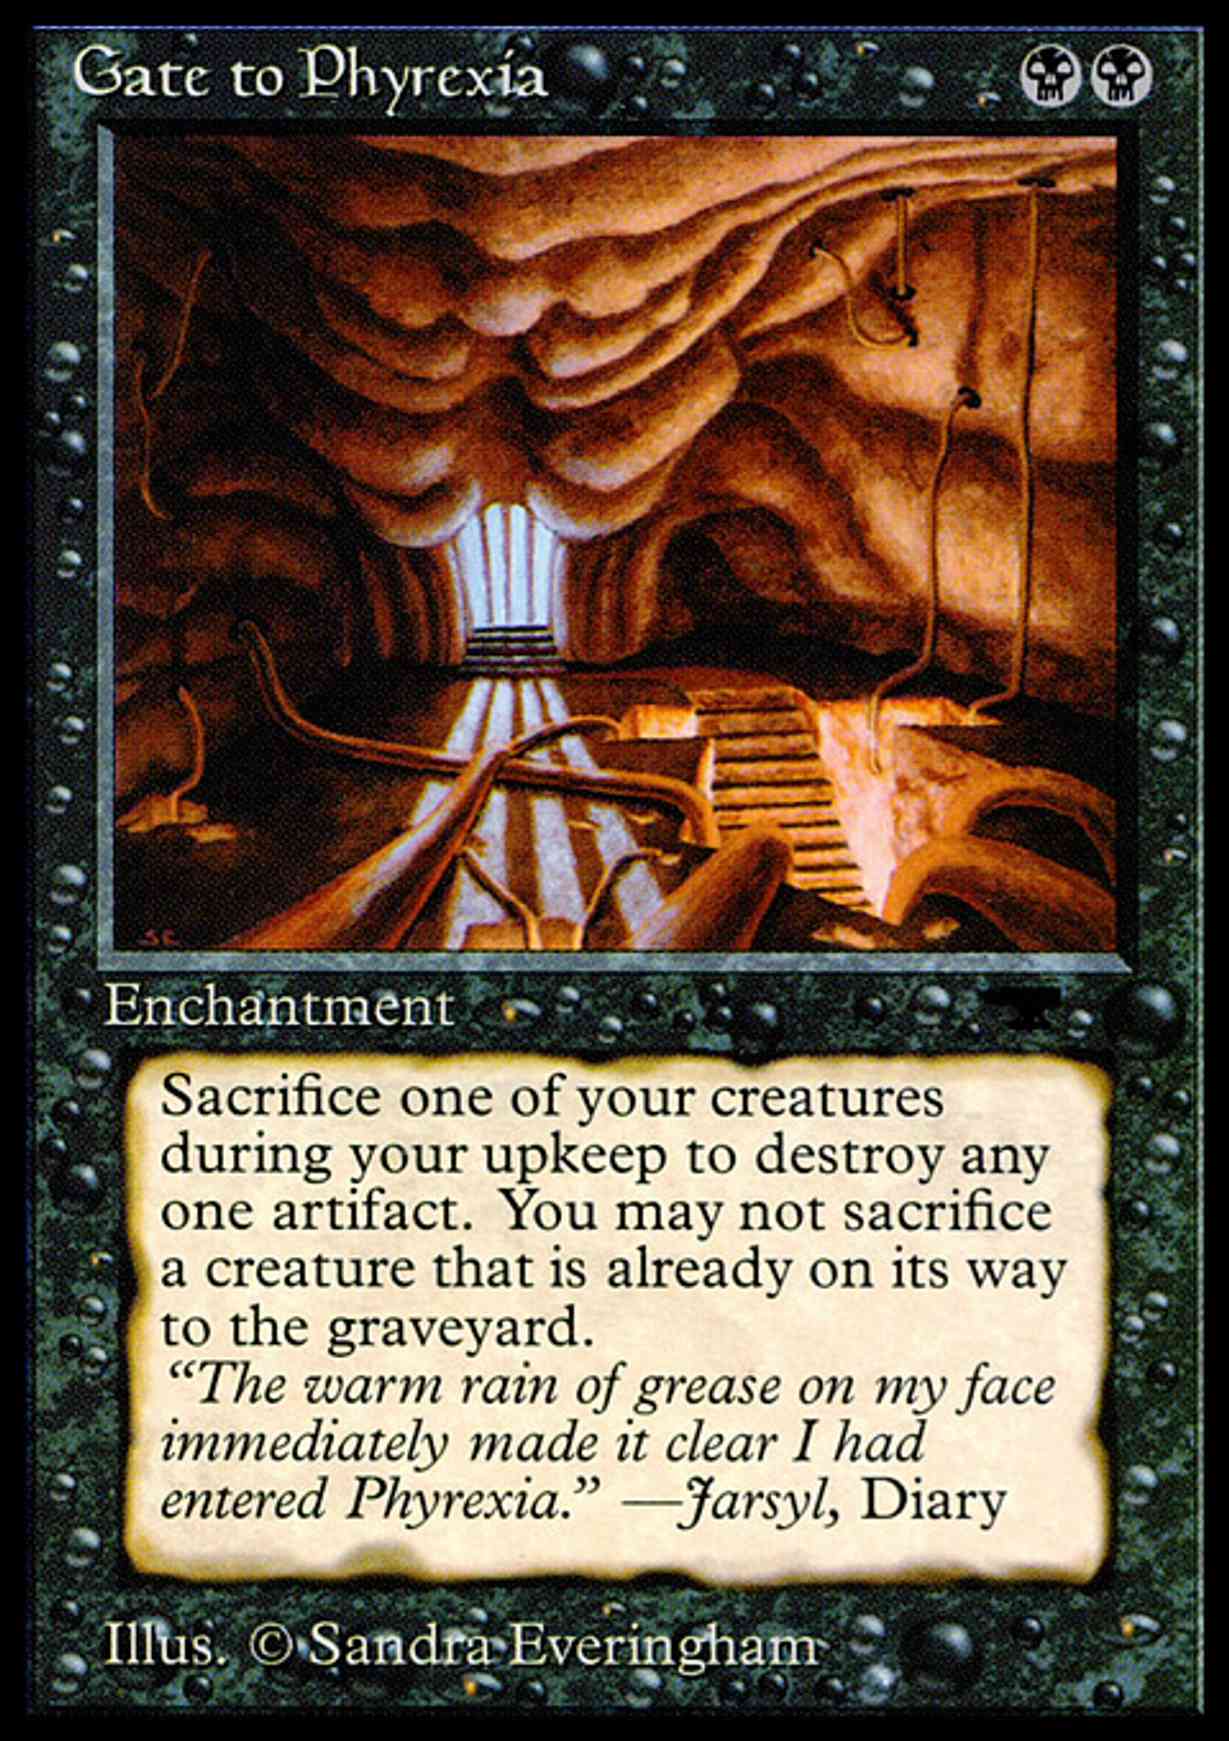 Gate to Phyrexia magic card front